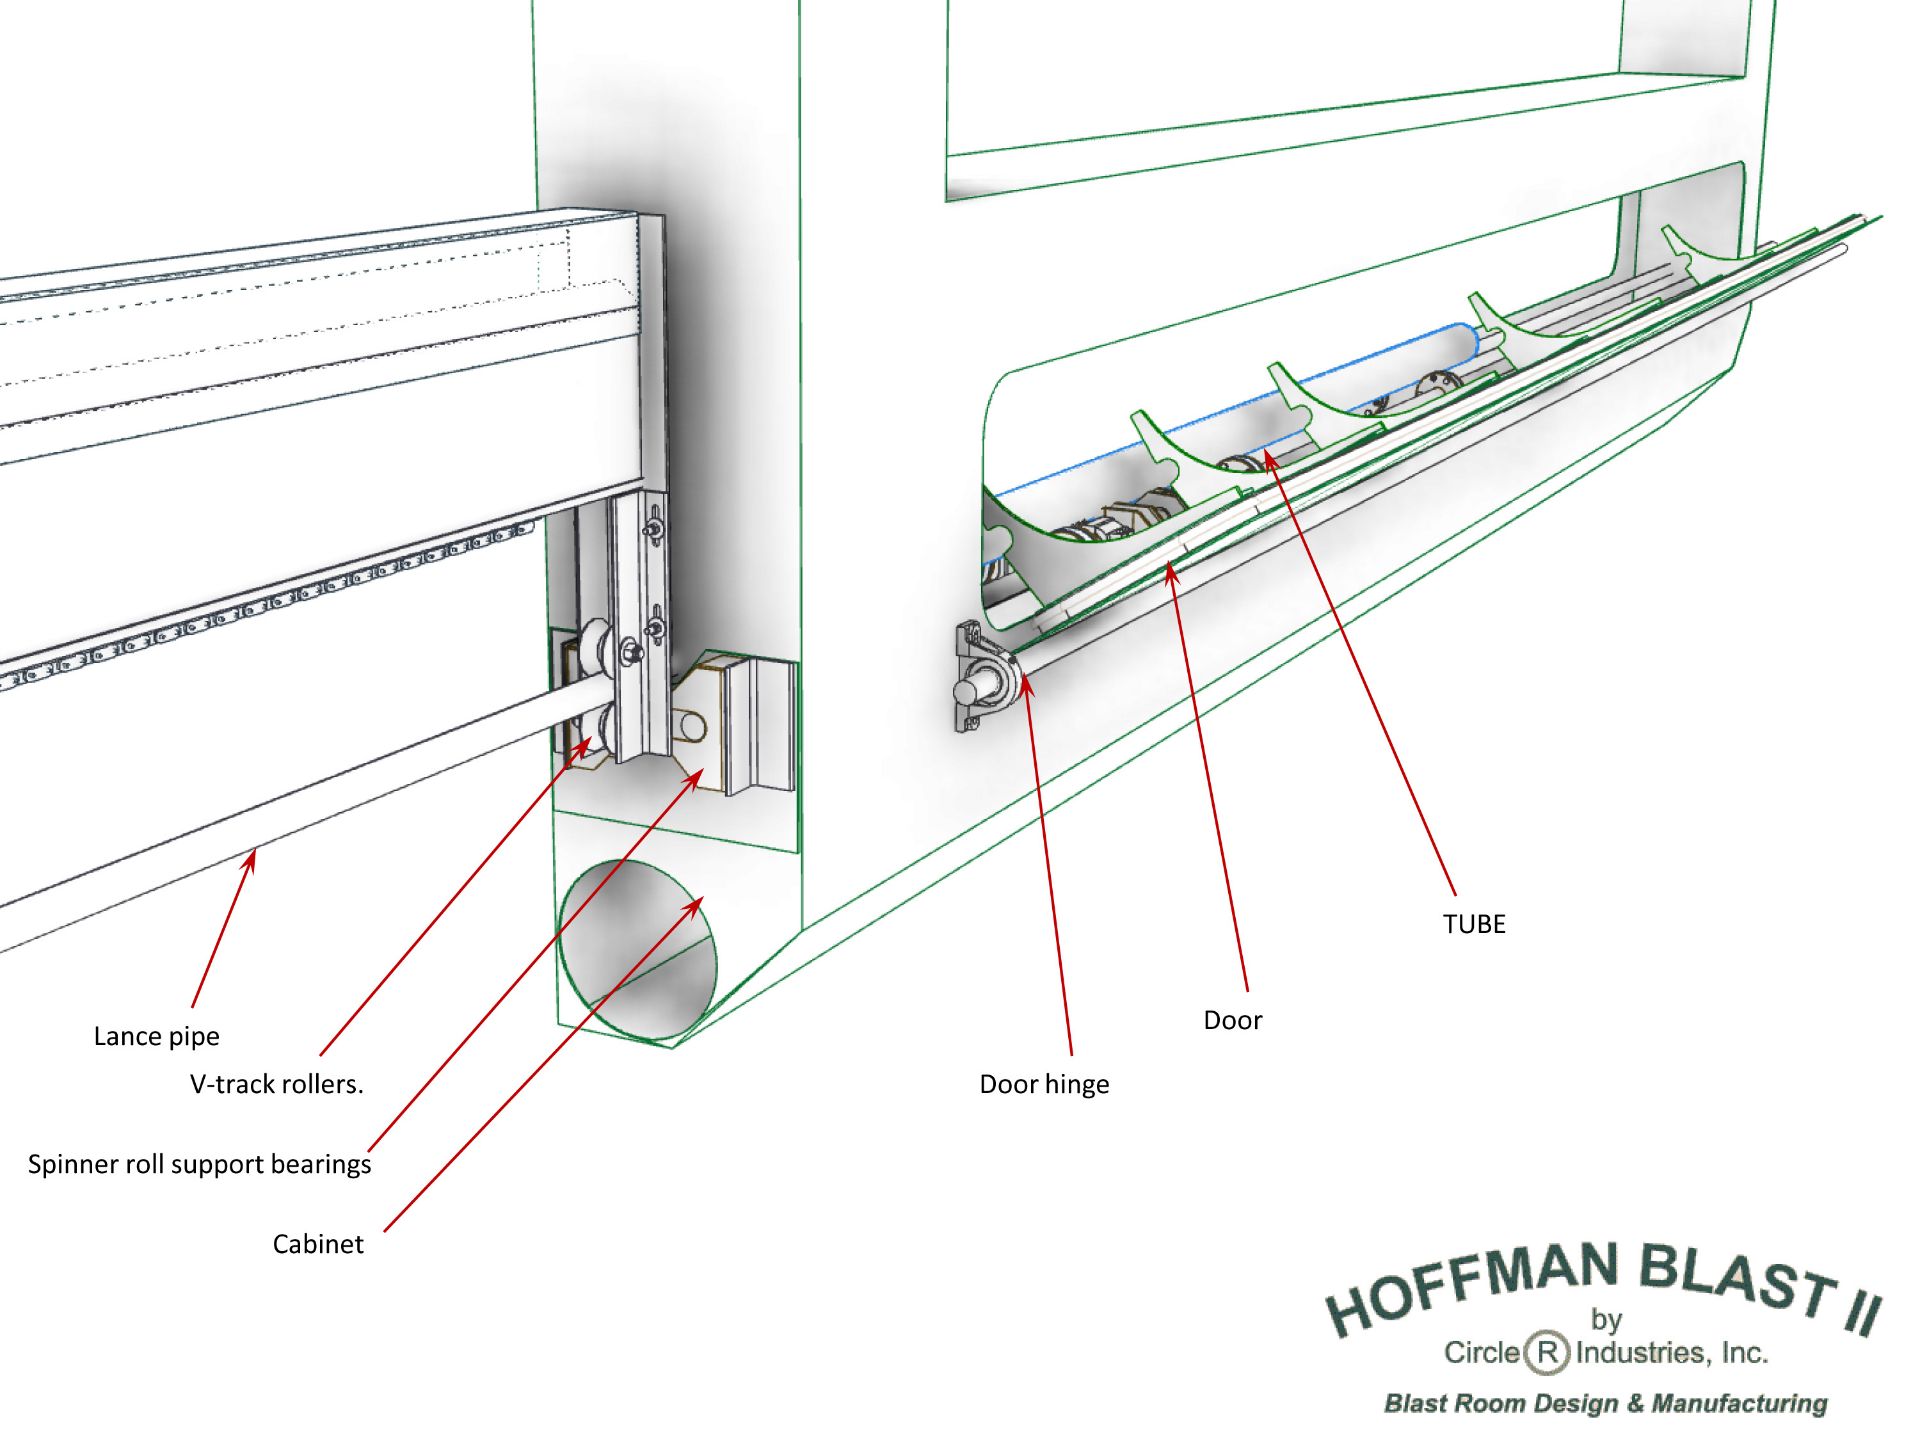 Complete Hoffman Blast II Line semi-automated system Prececo line (contains lots 160, 161, 162) - Image 12 of 14